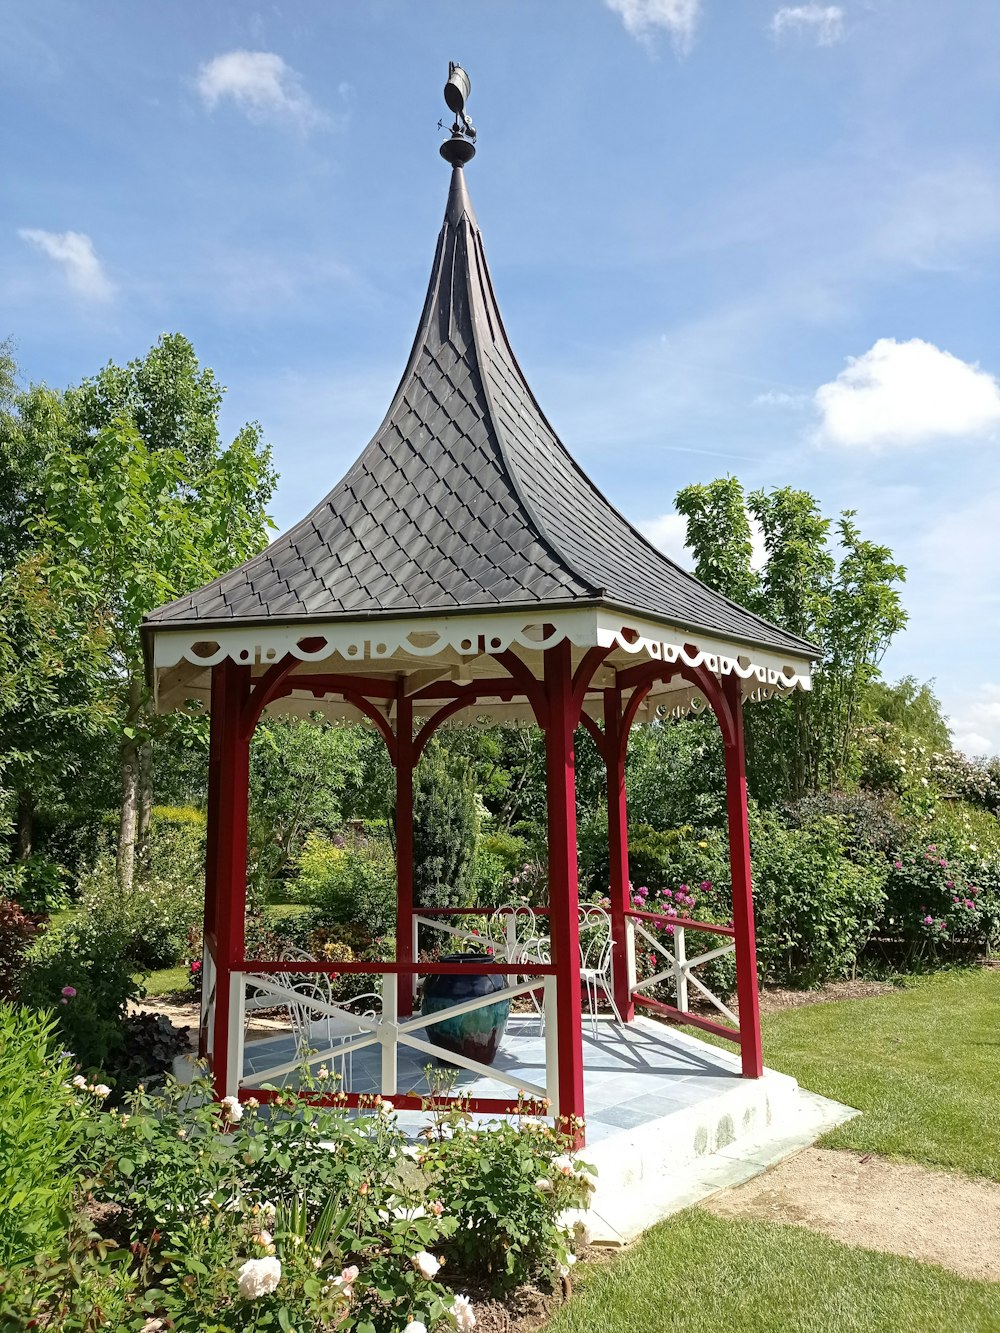 red and gray wooden gazebo surrounded by green trees during daytime